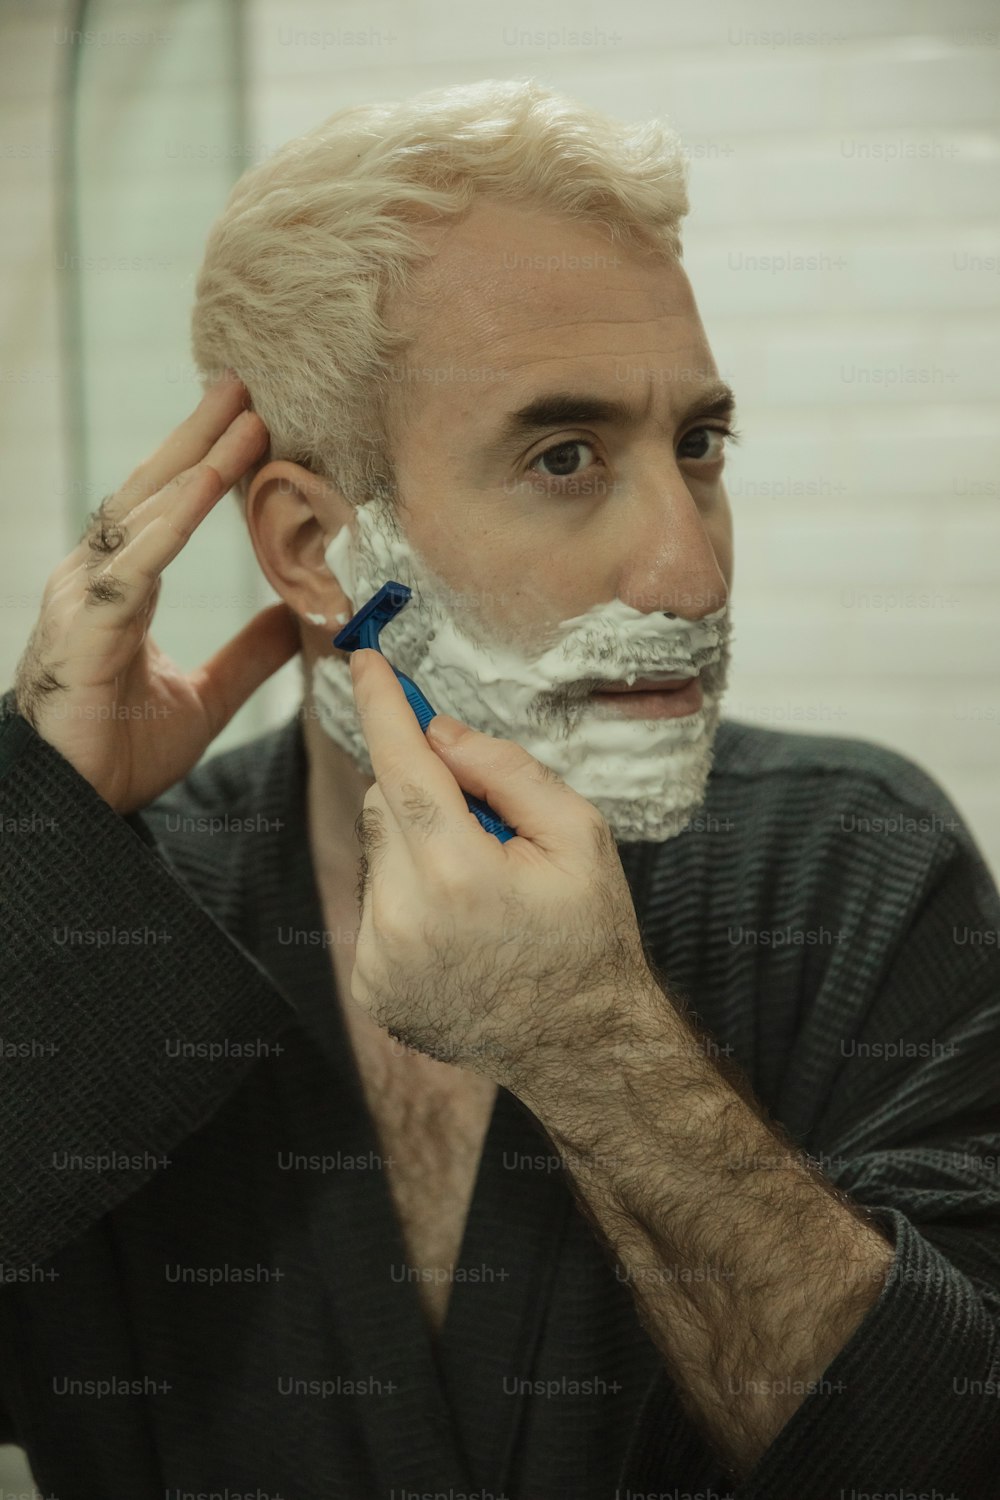 a man is shaving his face with a razor